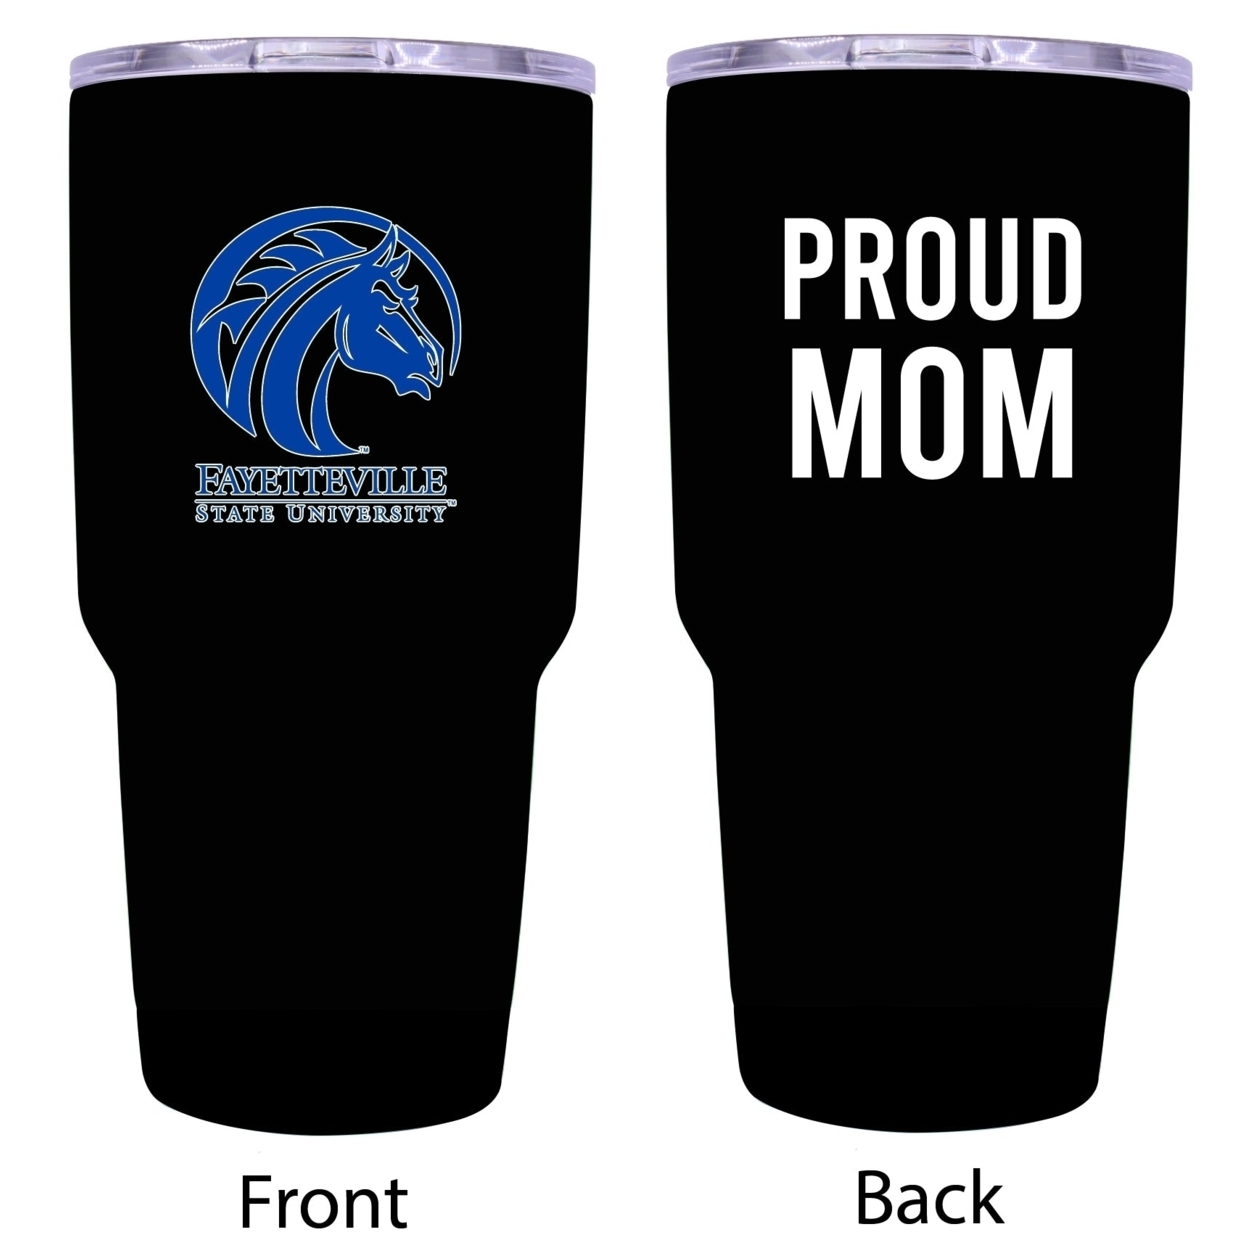 Fayetteville State University Proud Mom 24 Oz Insulated Stainless Steel Tumblers Choose Your Color.